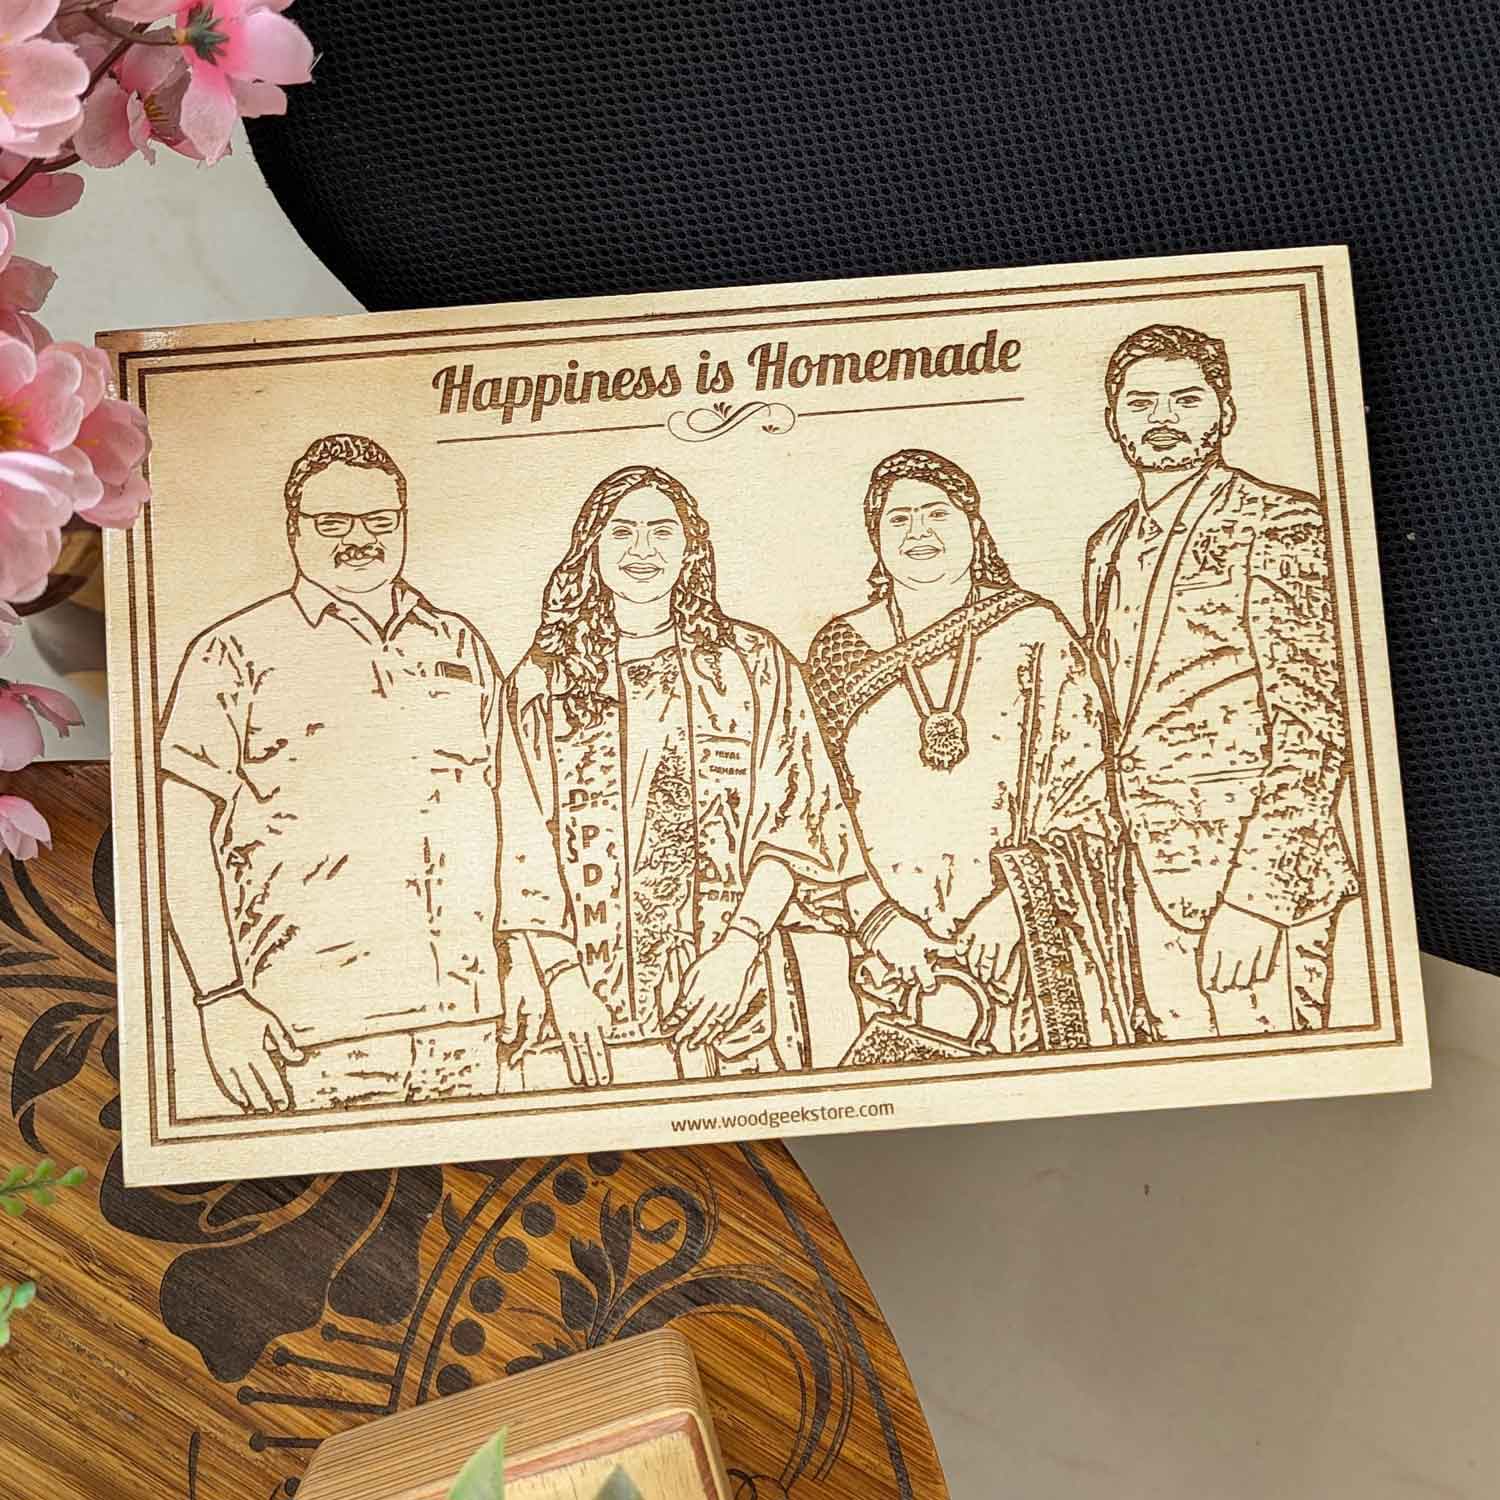 Happiness is Homemade - Engraved Family Photo Frame